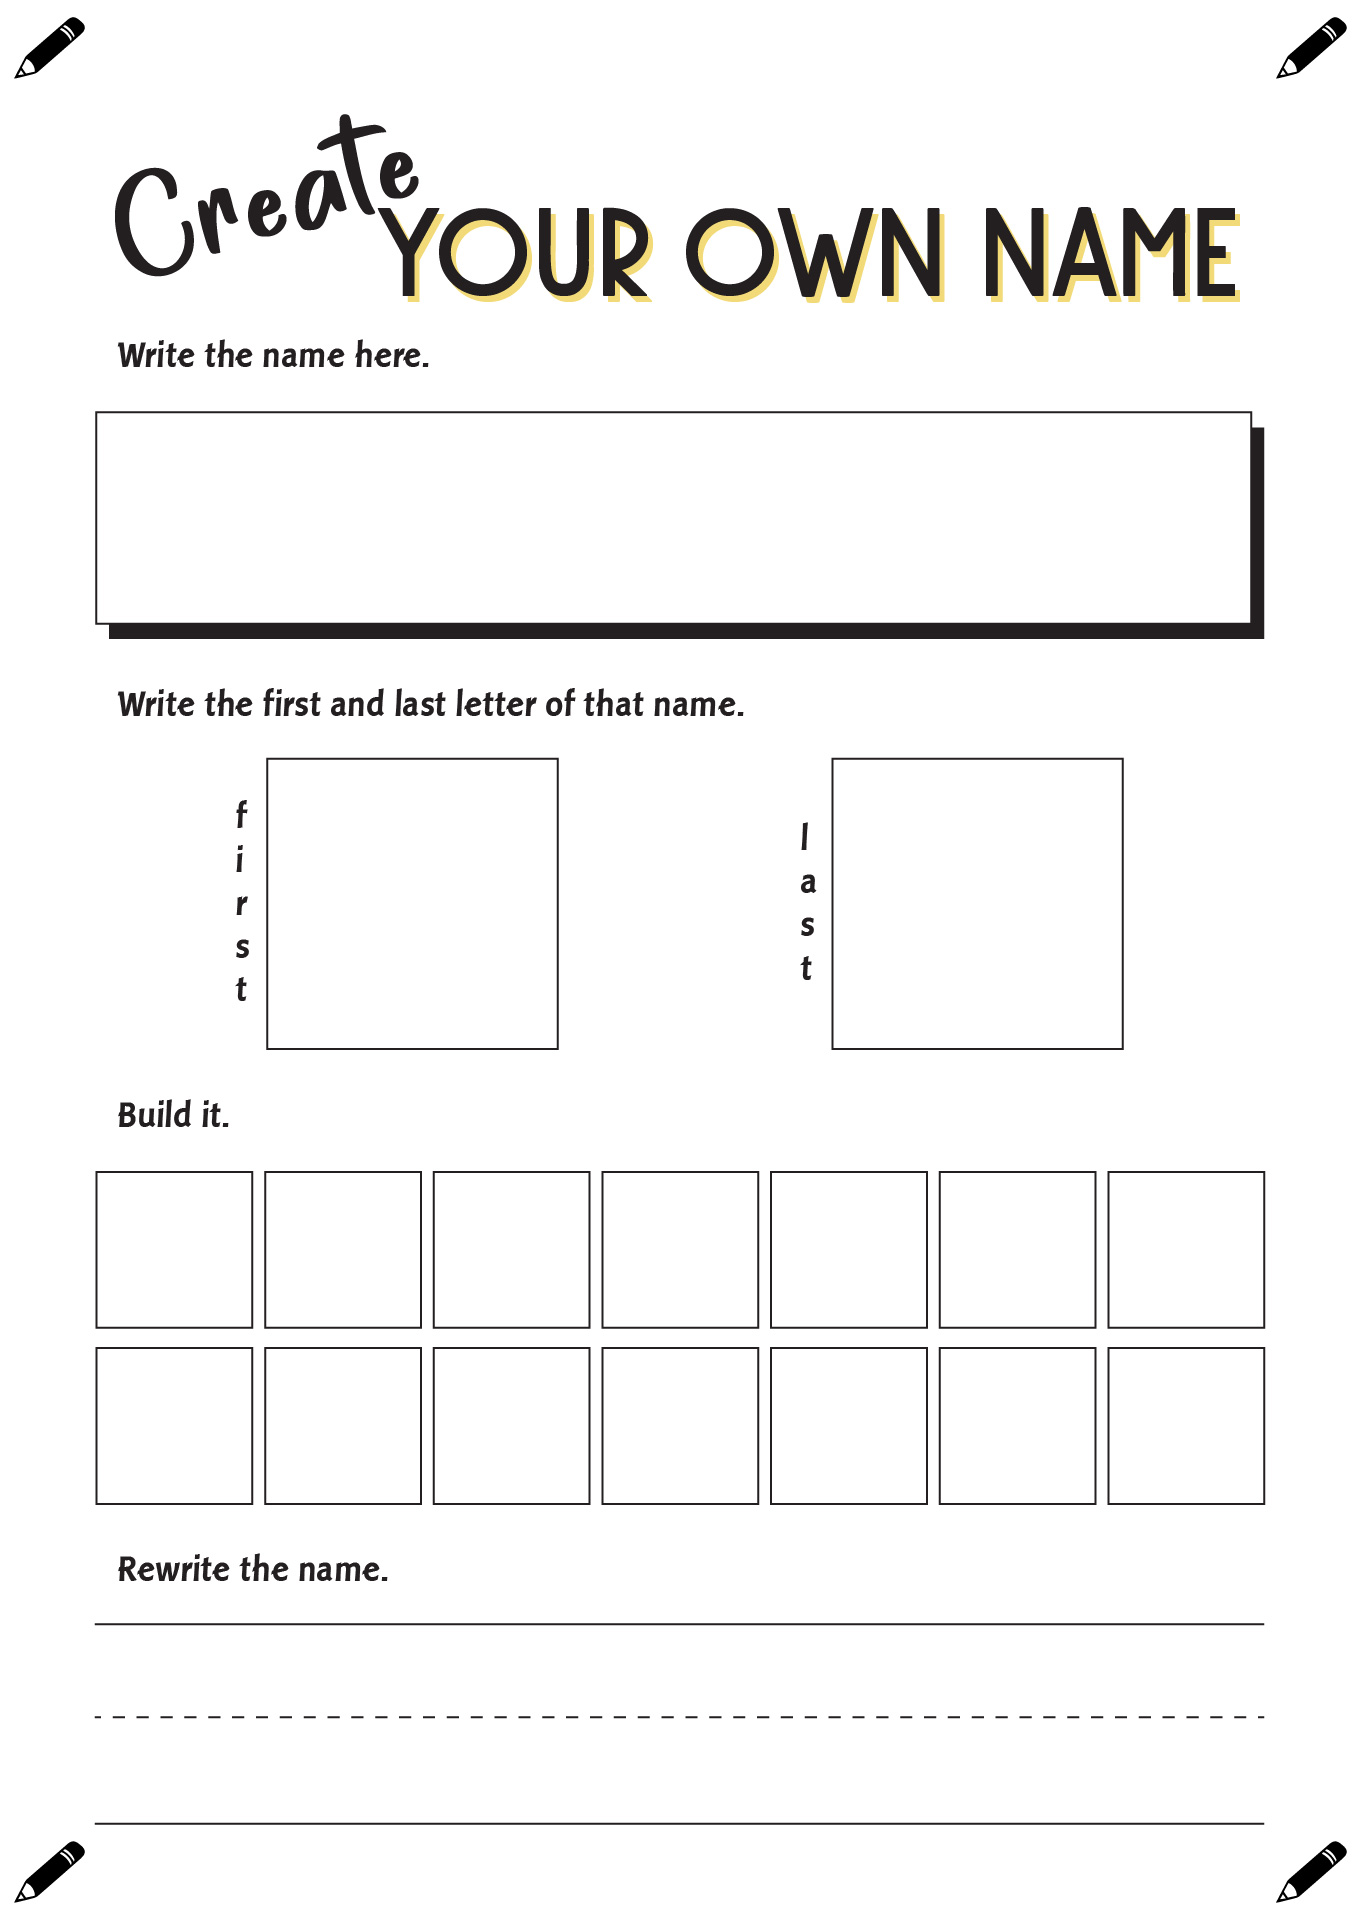 Create Your Own Name Worksheets